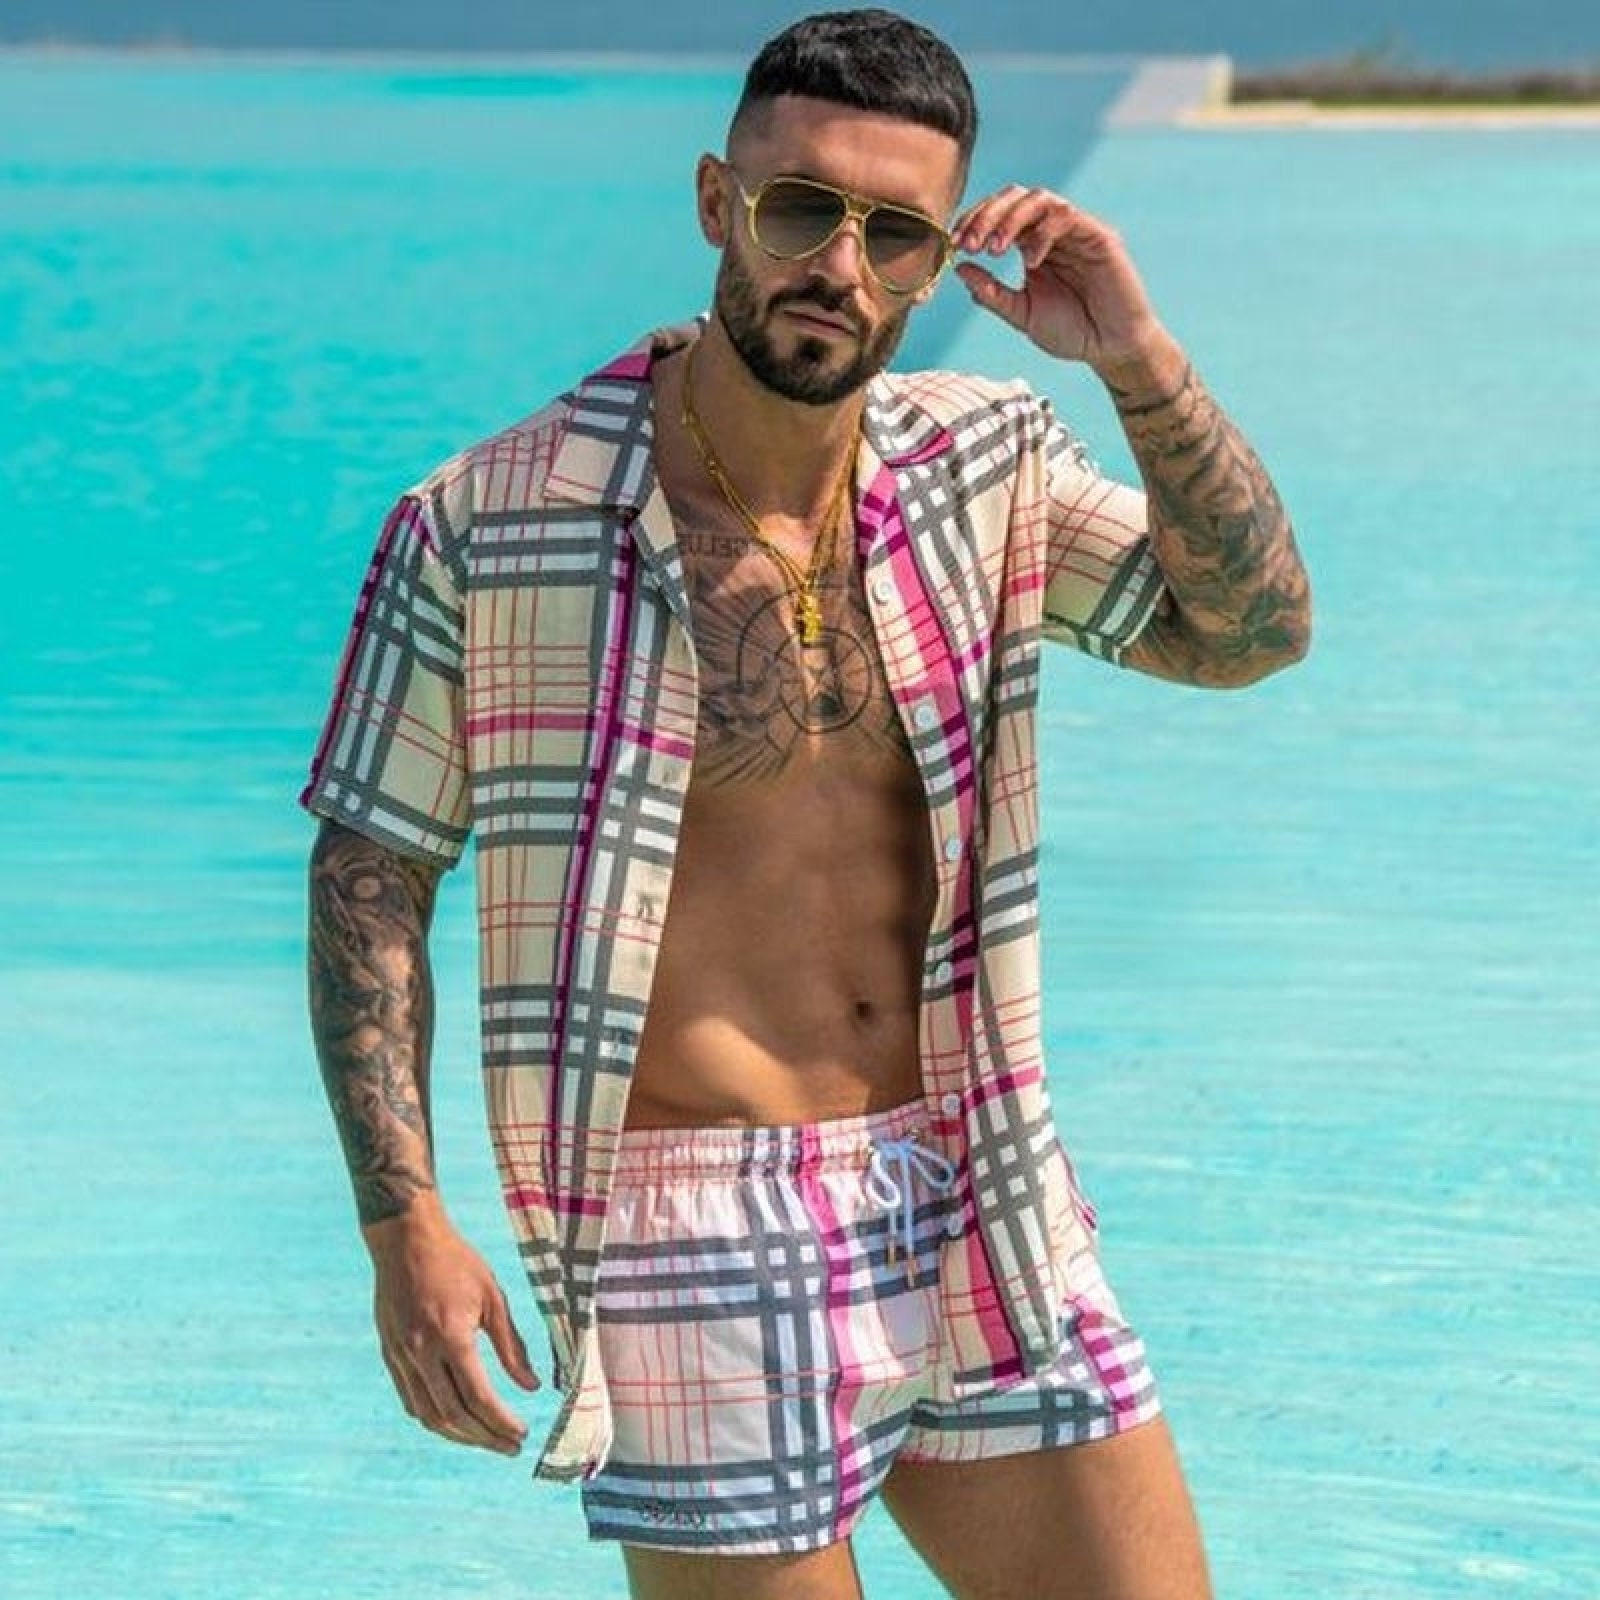 Mylivingdreamstore Mens Tropical Print Shirt and Shorts Set 2 Exotic Prints Great Casual Streetwear or Beachwear in Sizes S - XXXL